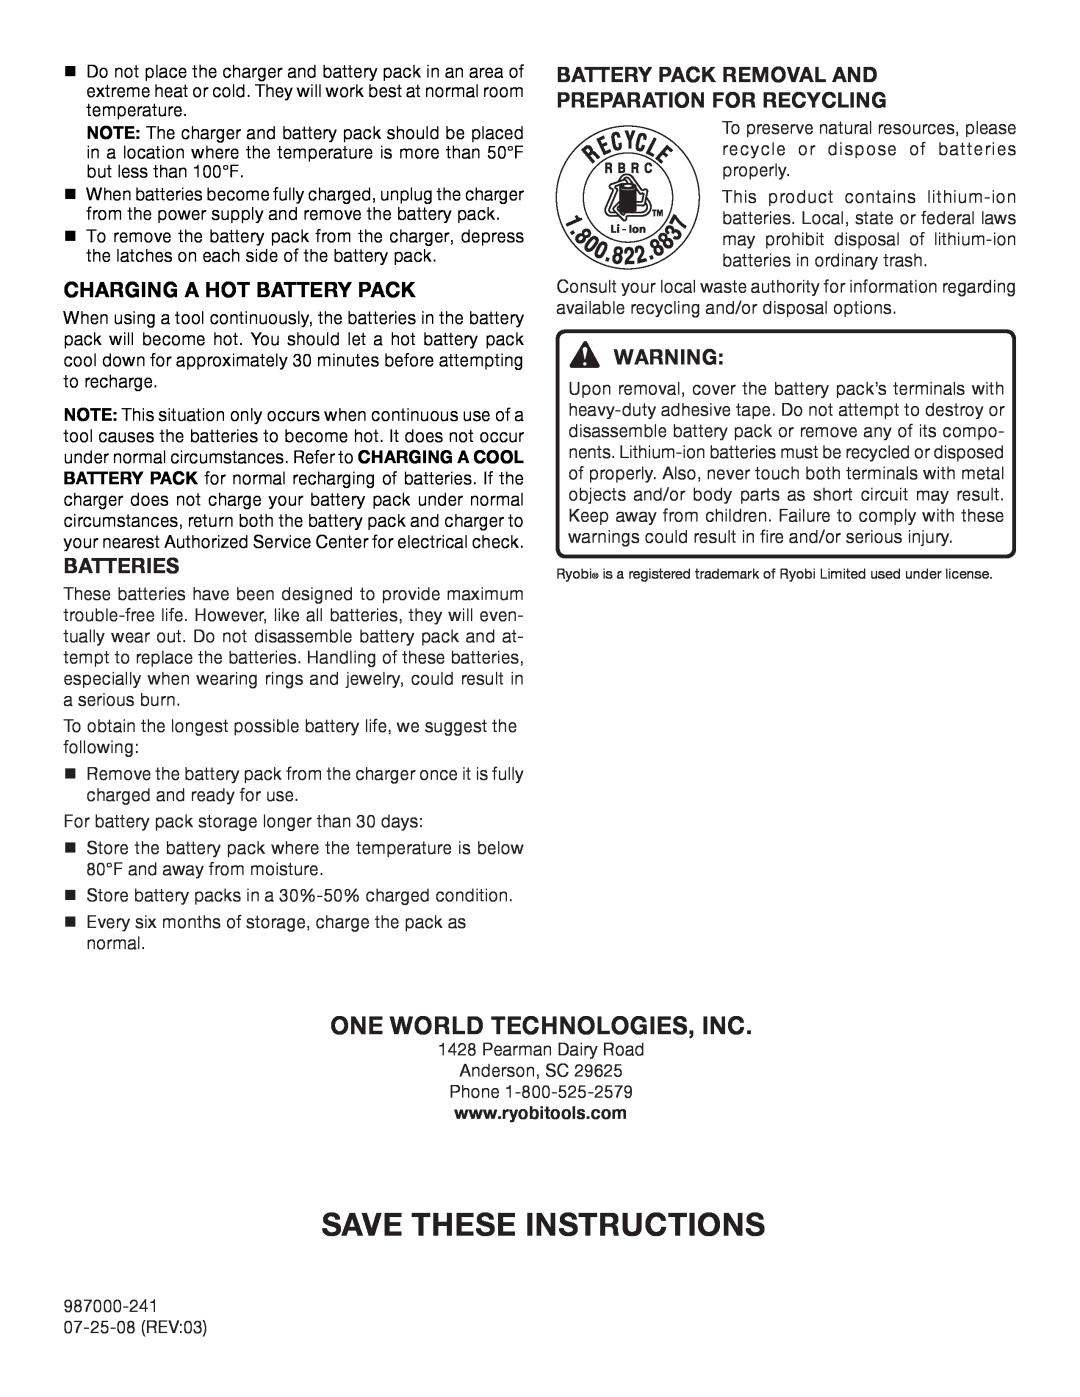 Ryobi CH120L, 140503001 manual Save These Instructions, One World Technologies, Inc, Charging A Hot Battery Pack, Batteries 